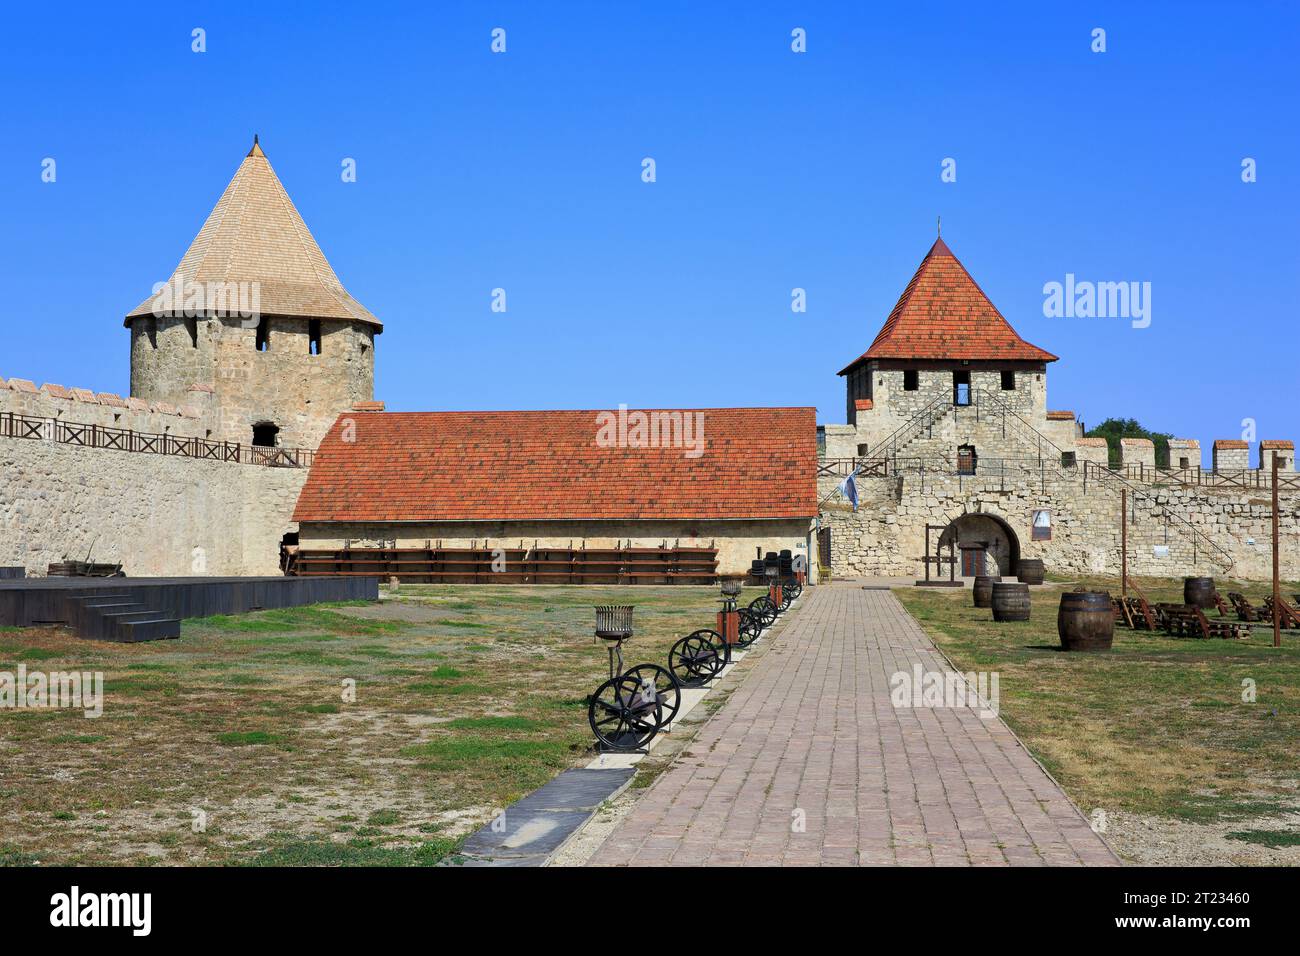 The bailey (inner courtyard) of the 15th century Tighina Fortress in Bender (Transnistria), Moldova Stock Photo